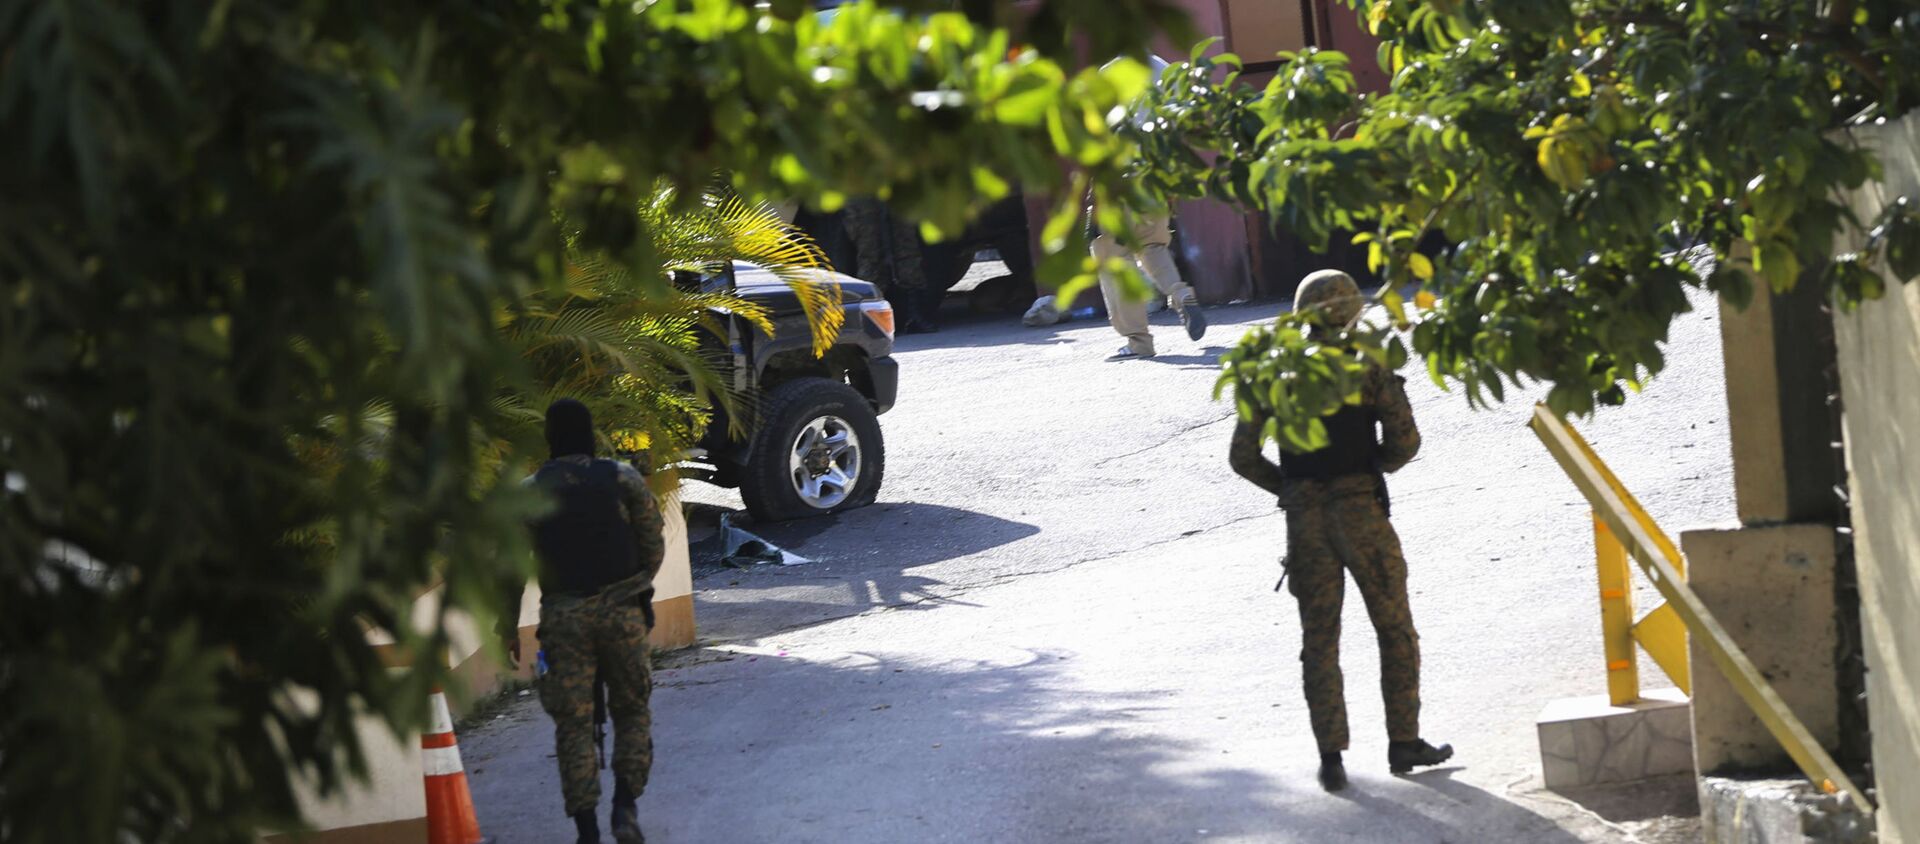 Soldiers stand guard at the entrance to the house of late Haitian President Jovenel Moise in Port-au-Prince, Haiti, Wednesday, July 7, 2021. Moïse was assassinated in an attack on his private residence early Wednesday, and first lady Martine Moïse was shot in the overnight attack and hospitalized, according to a statement from the country’s interim prime minister. (AP Photo/Joseph Odelyn) - 俄羅斯衛星通訊社, 1920, 09.07.2021